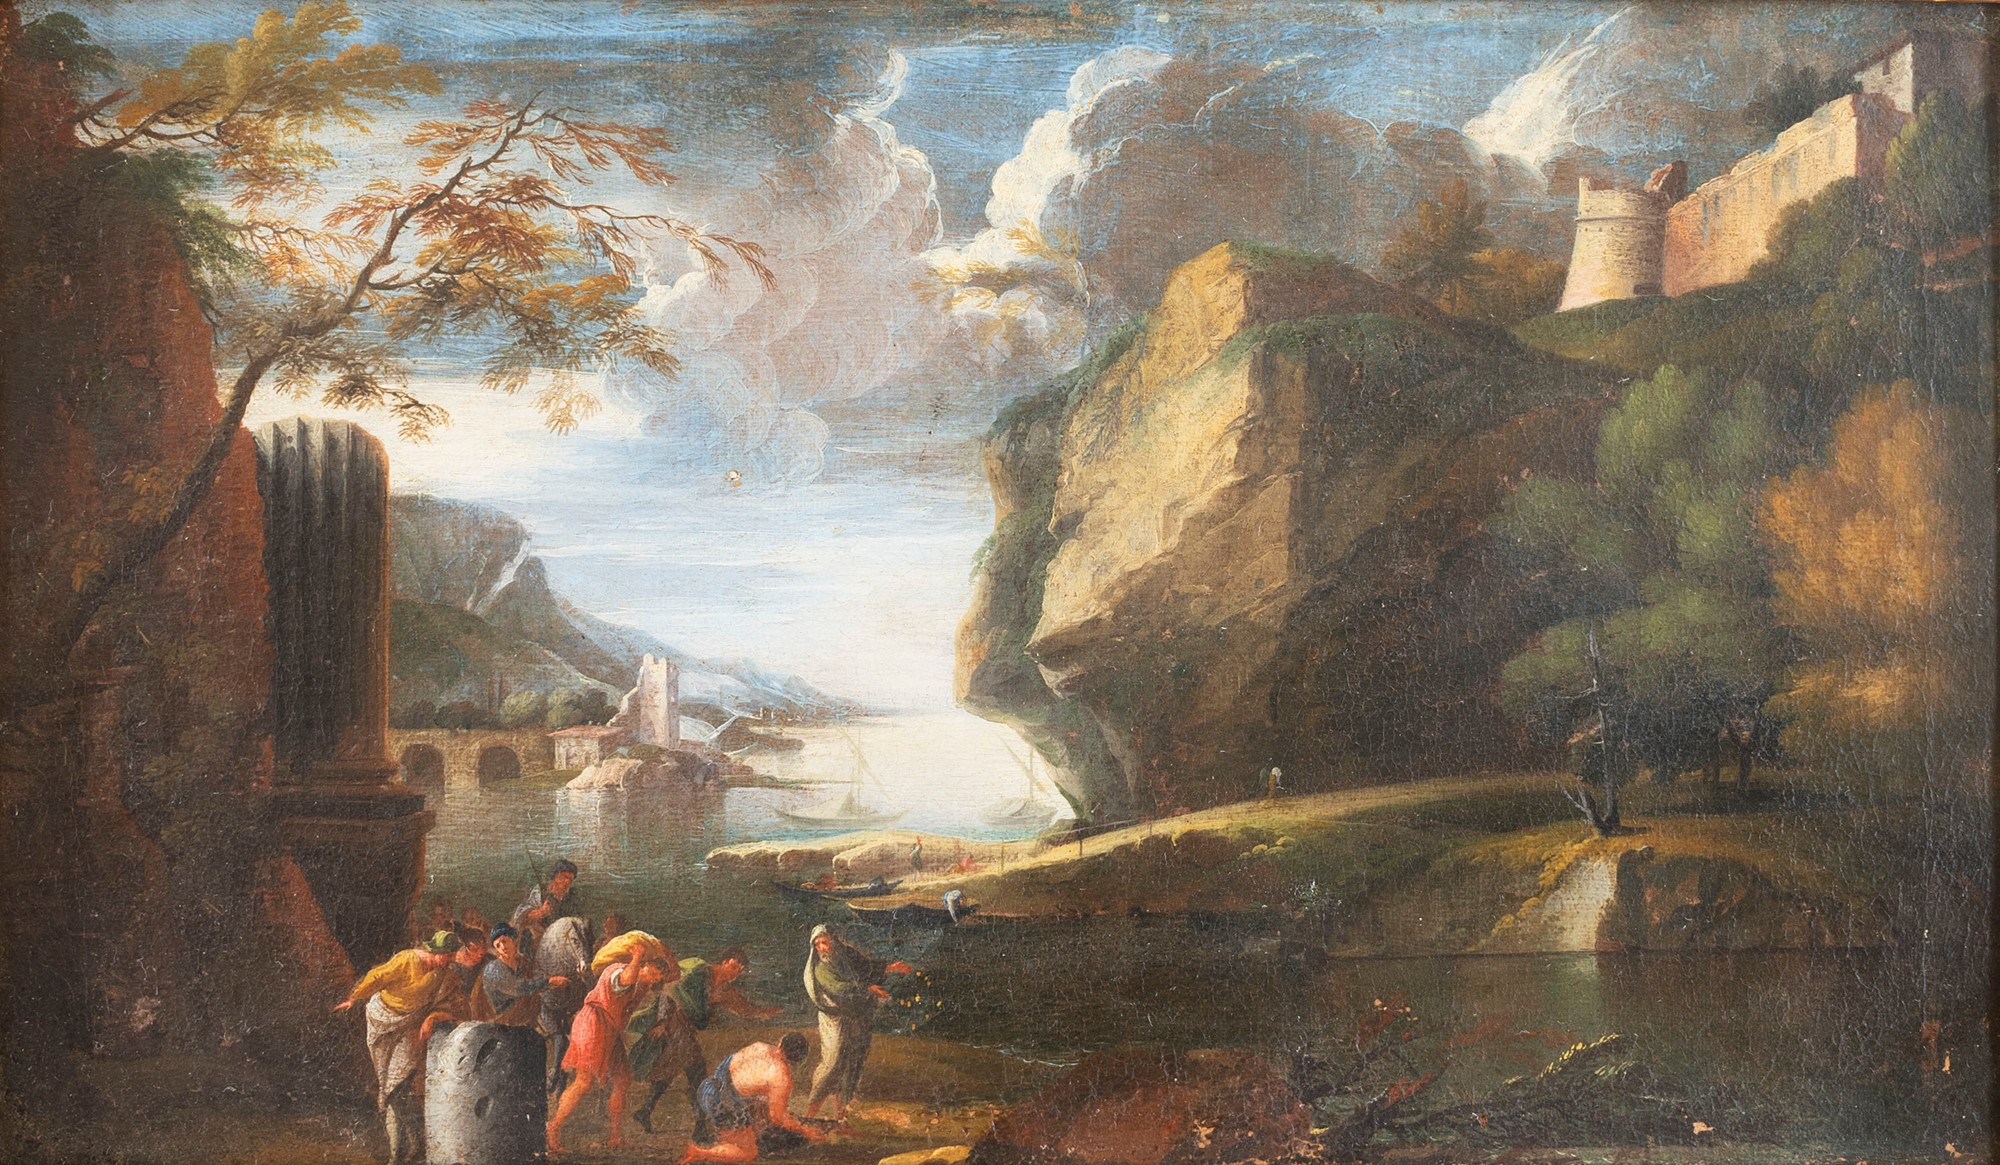 Neapolitan school, XVII century - Two river landscapes with rocky mountains - Image 5 of 7